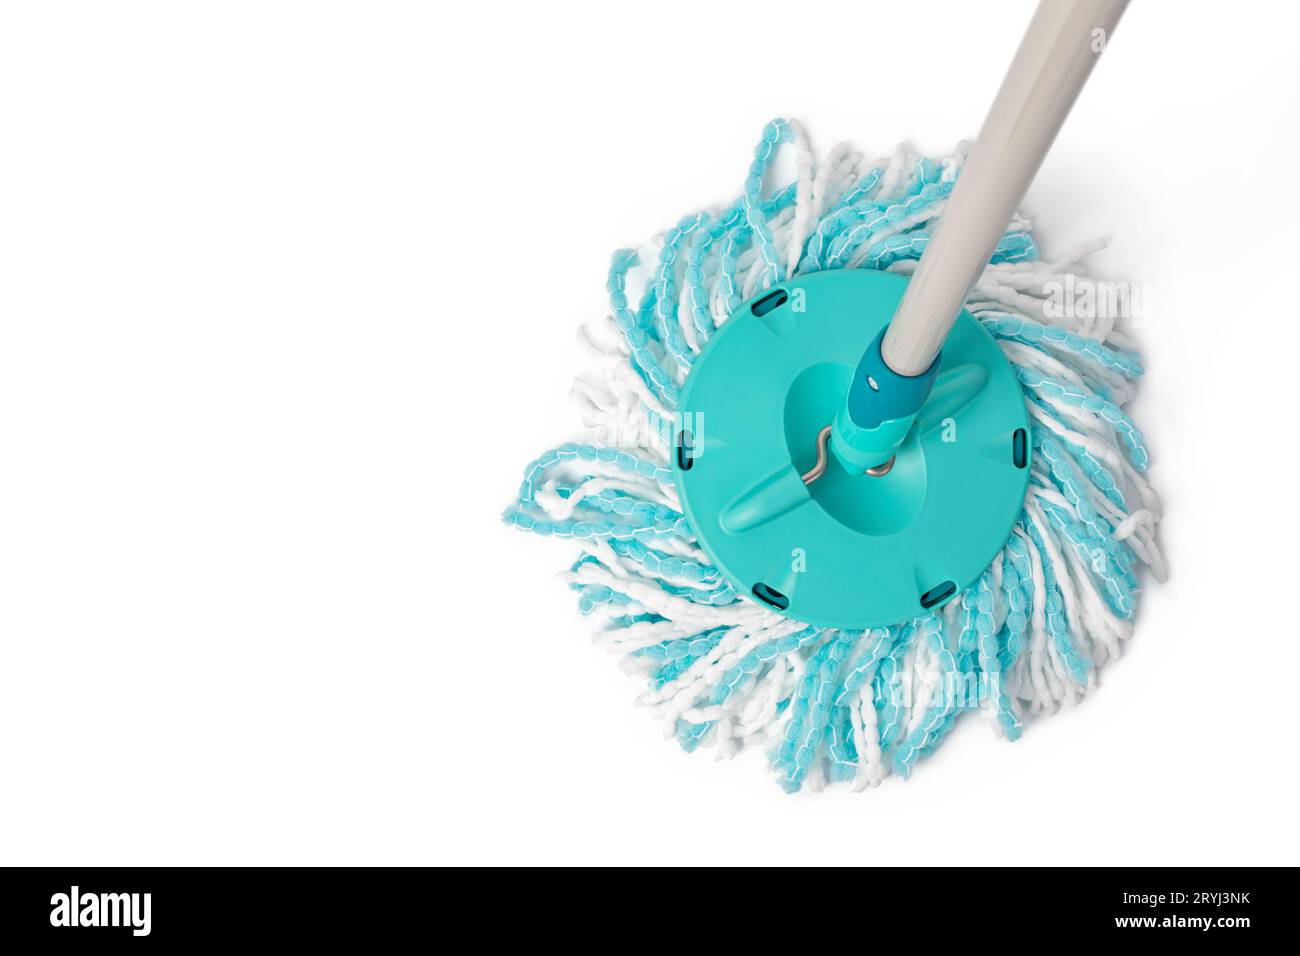 Cleaning mop and bucket Stock Photo